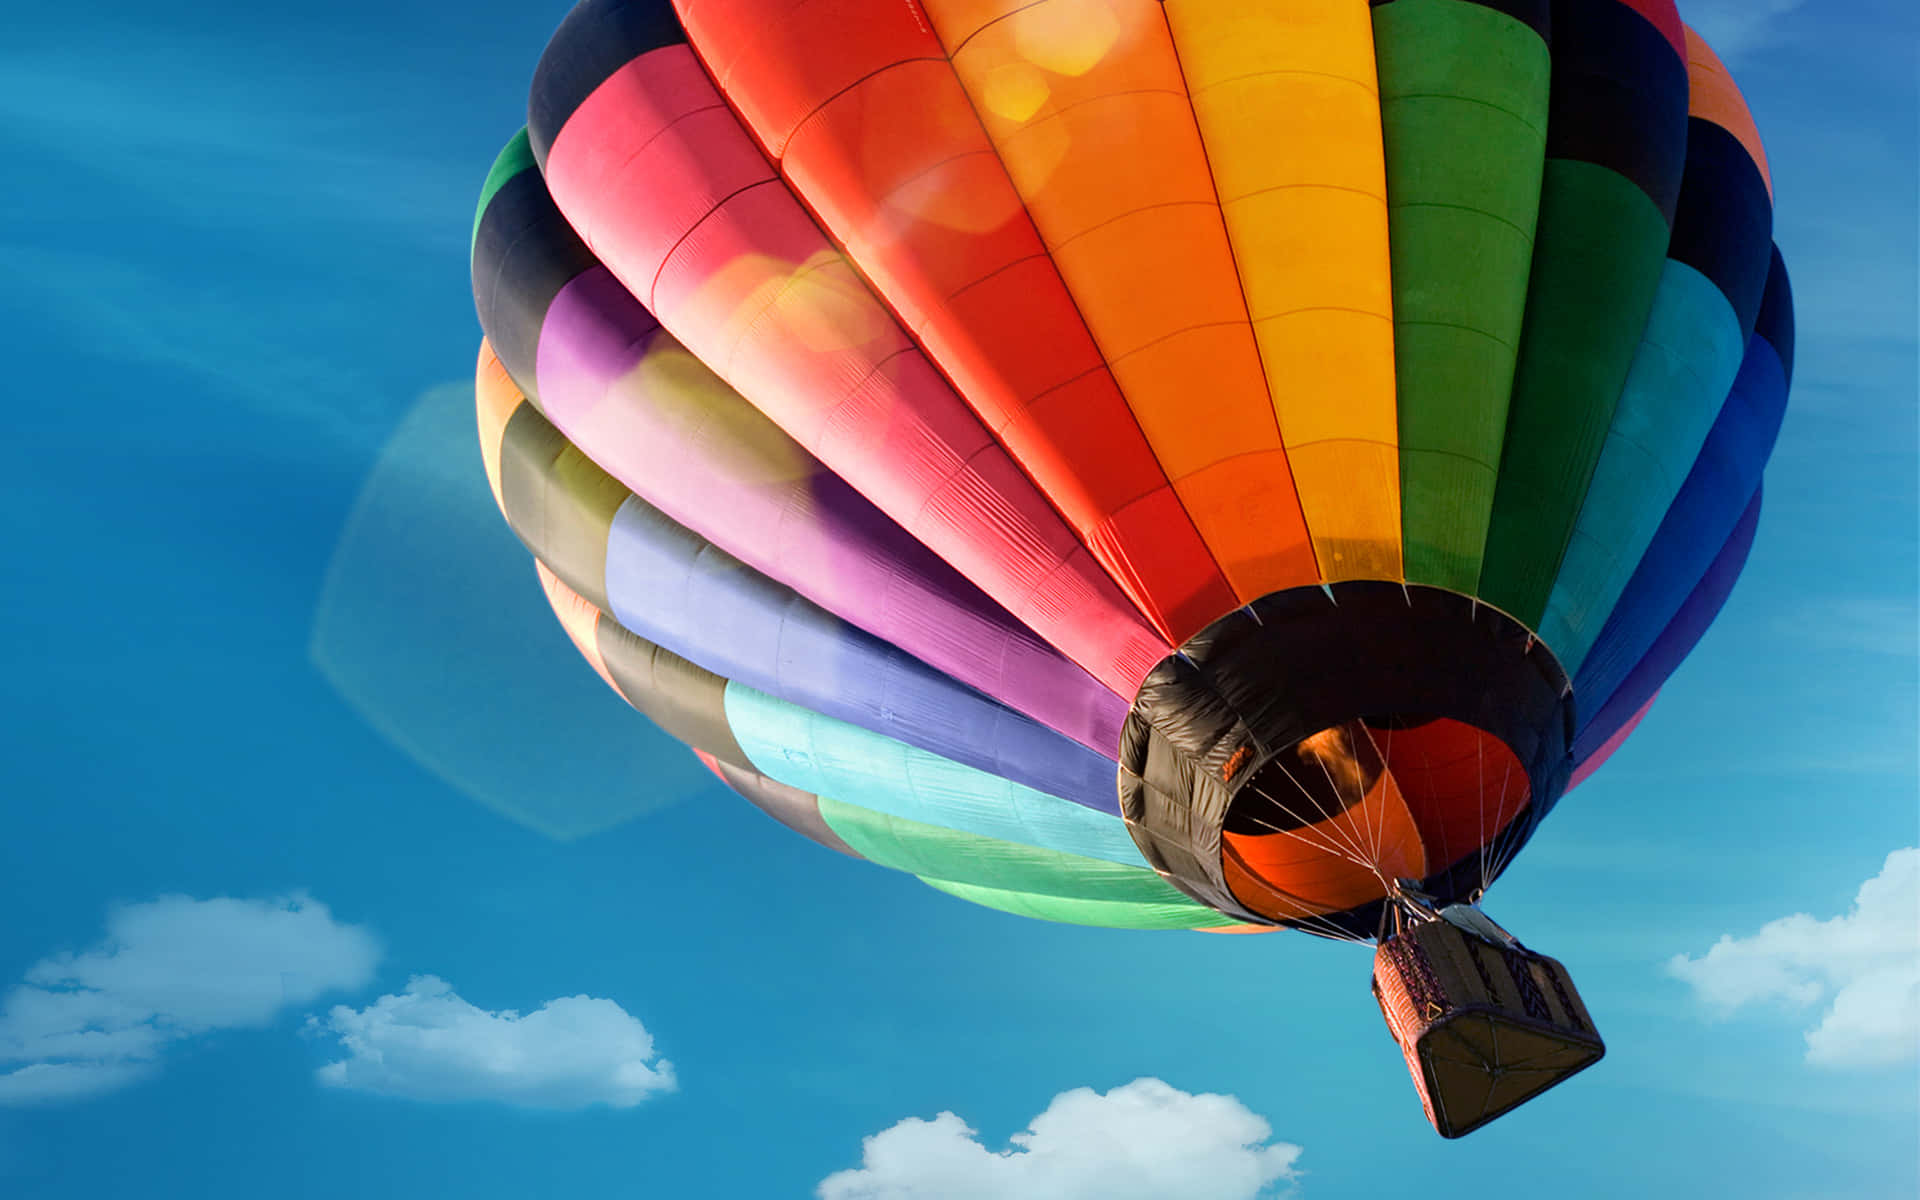 Download A Colorful Hot Air Balloon Flying In The Sky | Wallpapers.com